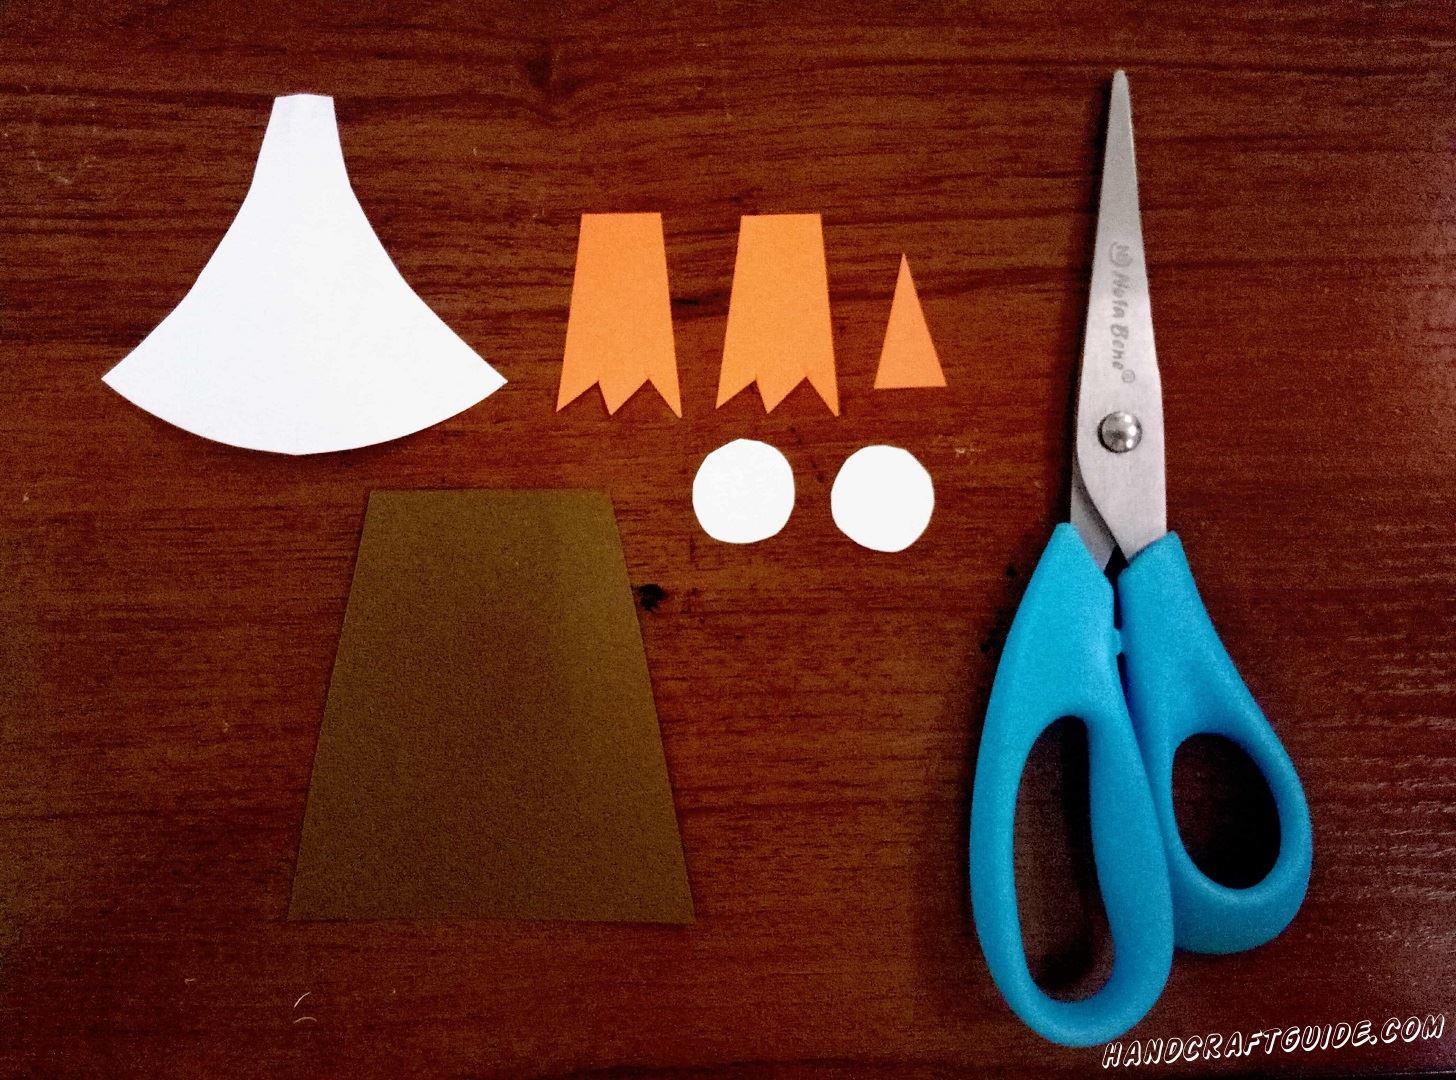 Cut out all necessary parts from black, white and orange paper.